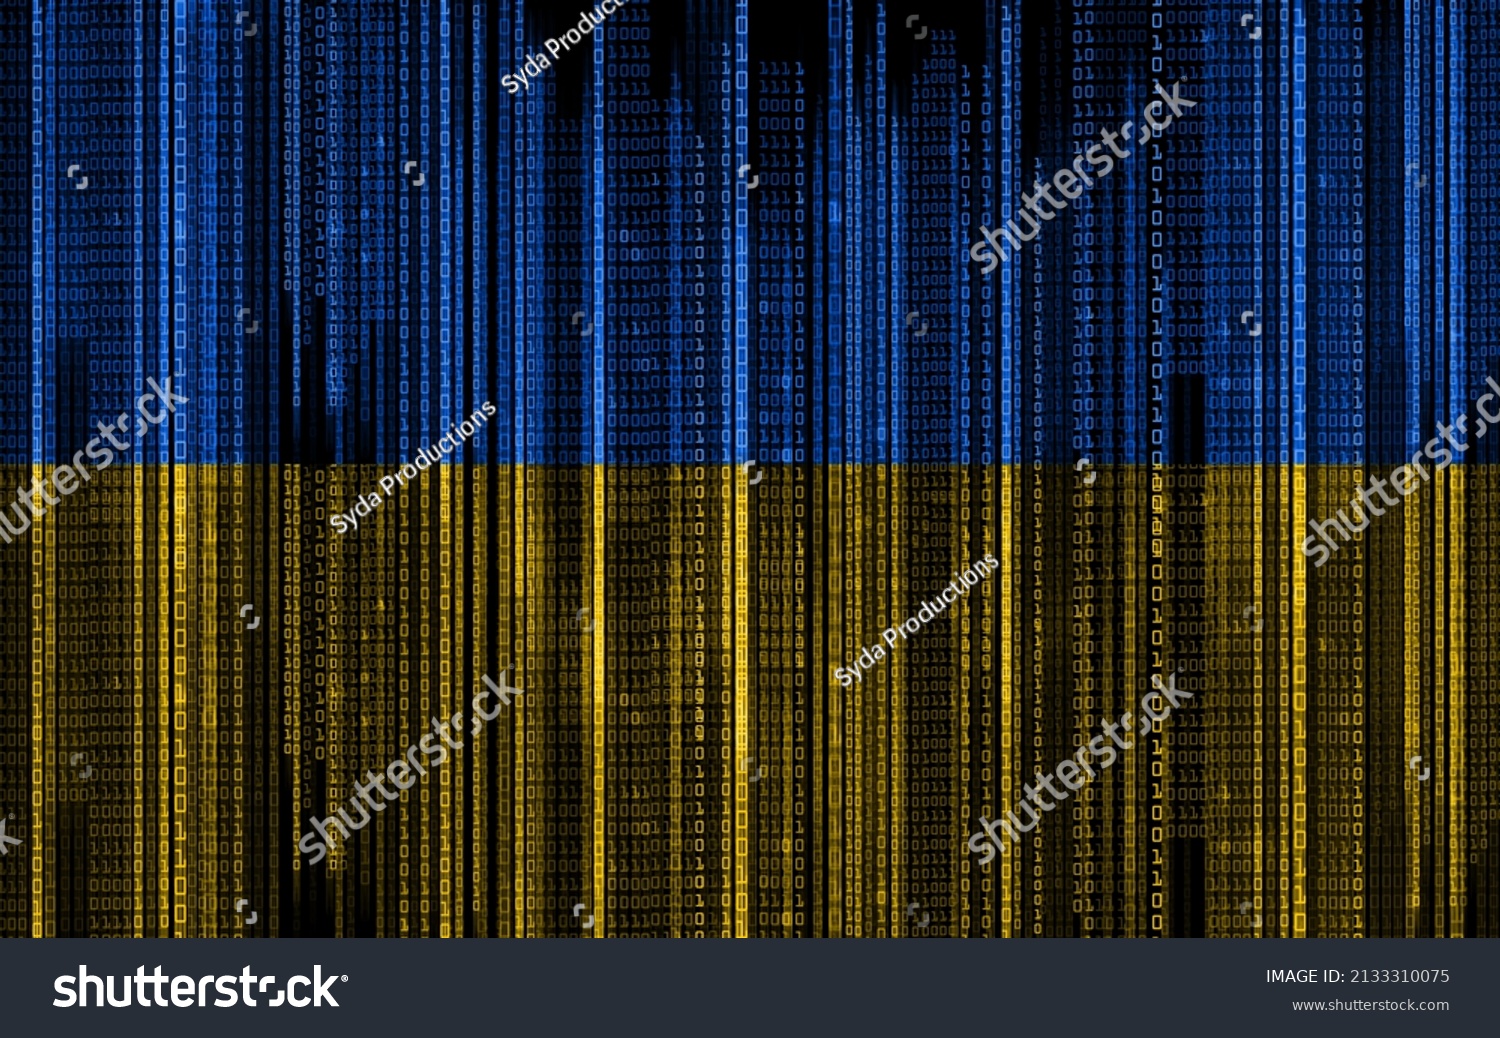 technology, cyberspace and information concept - binary code pattern in colors of flag of ukraine #2133310075